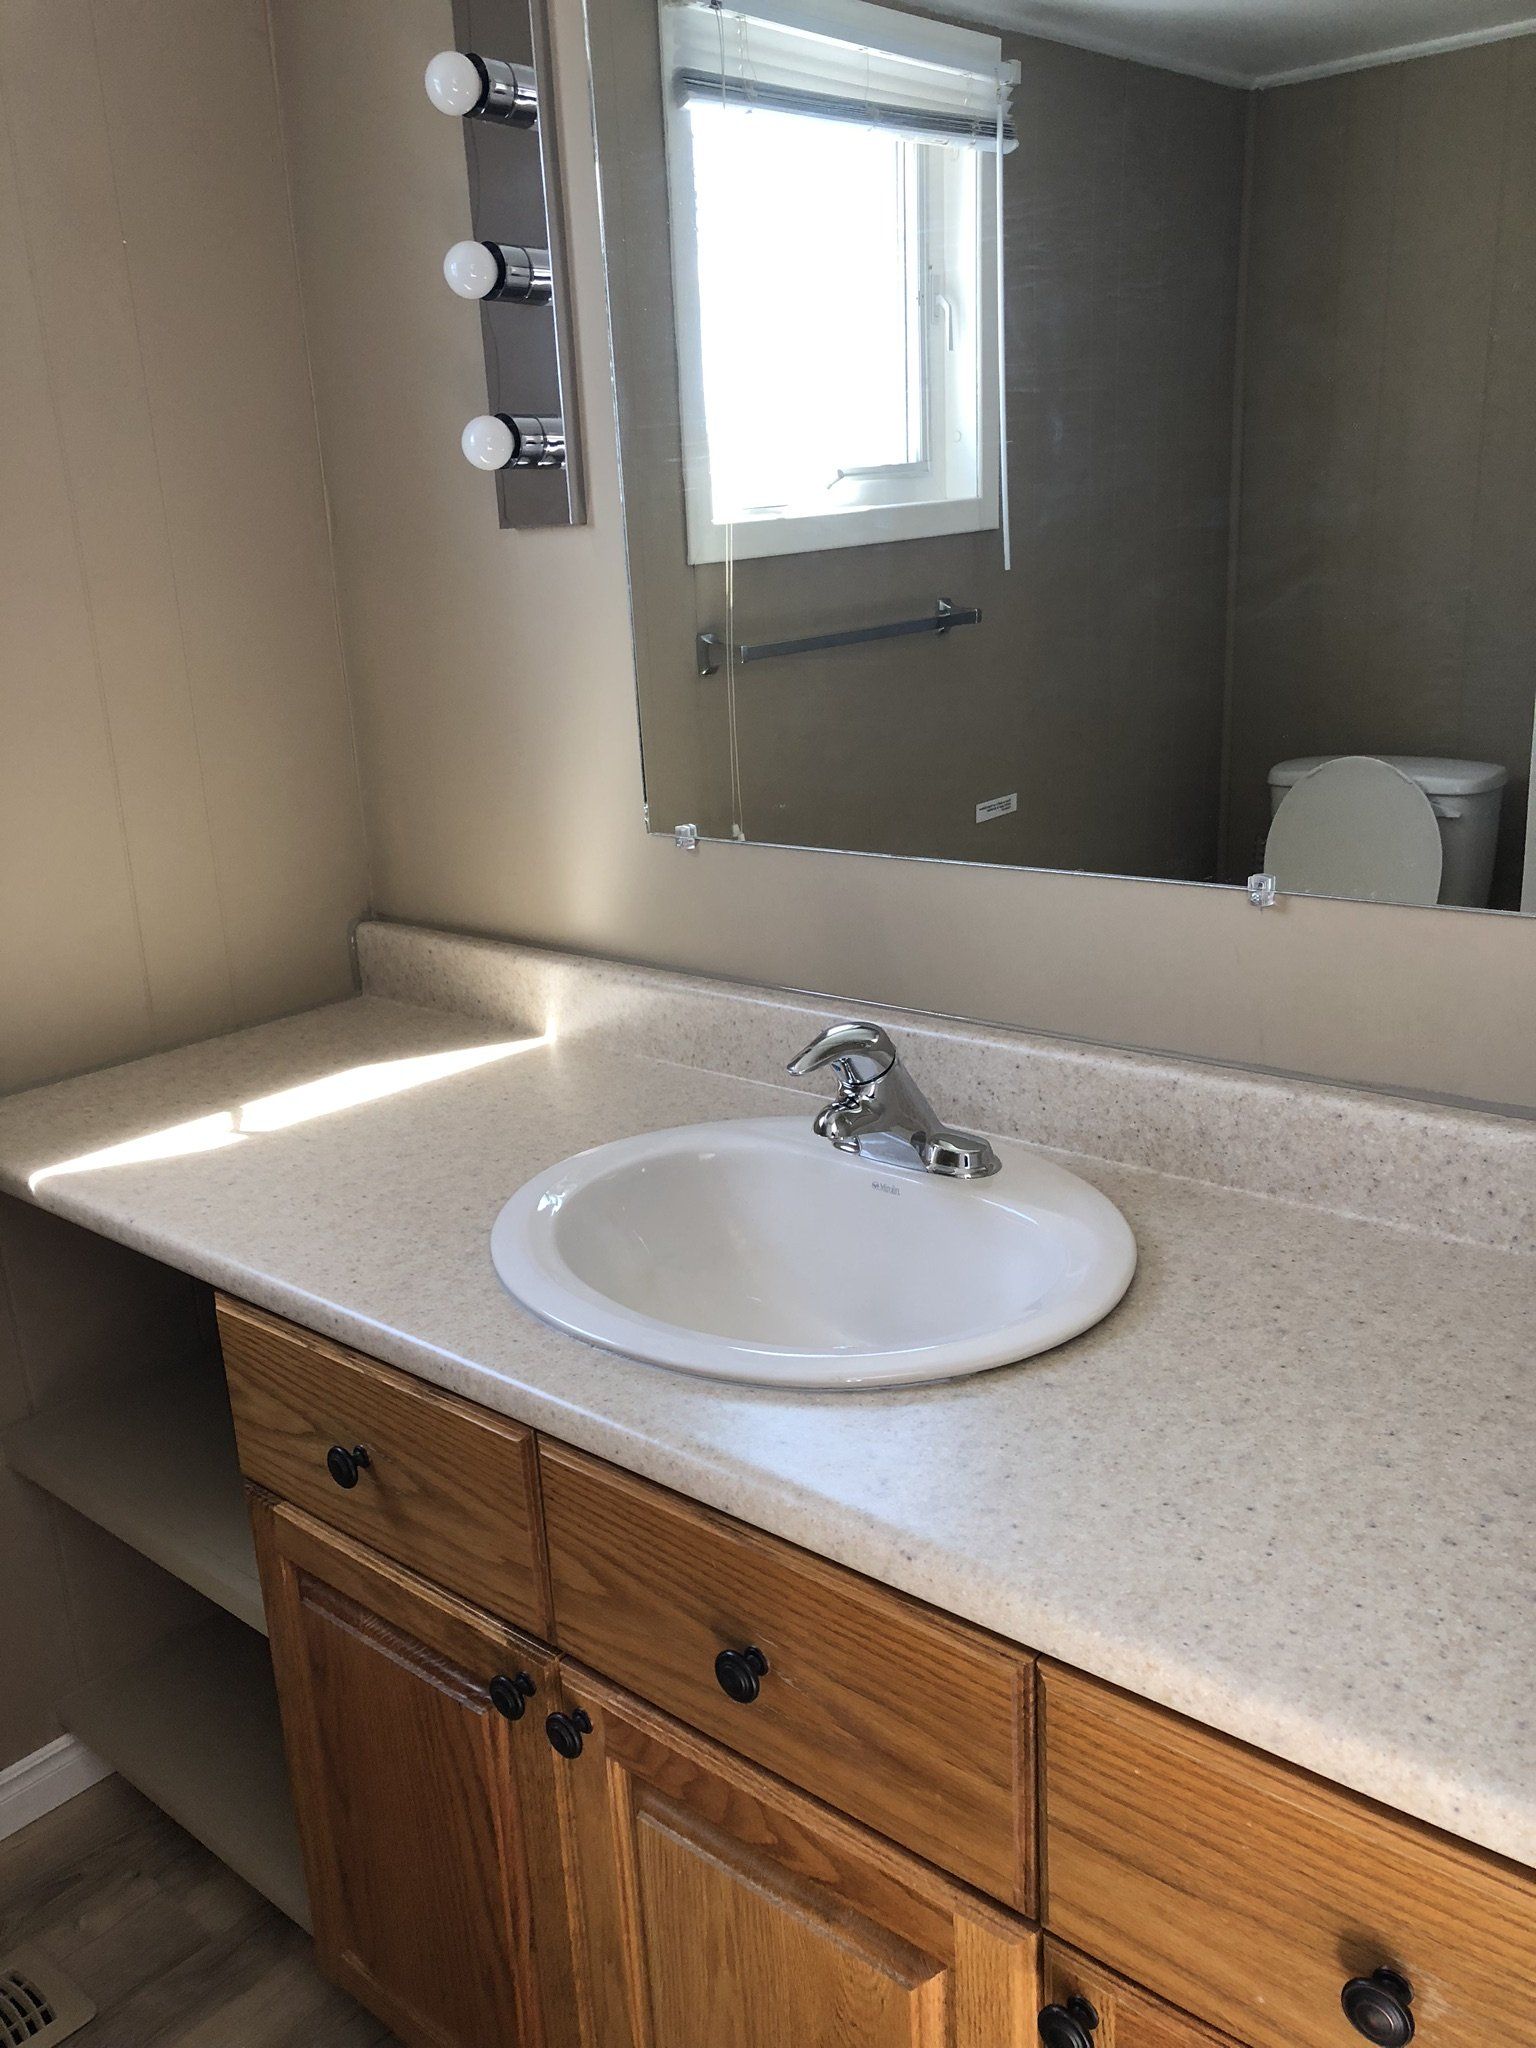 A bathroom with a sink , mirror and toilet.